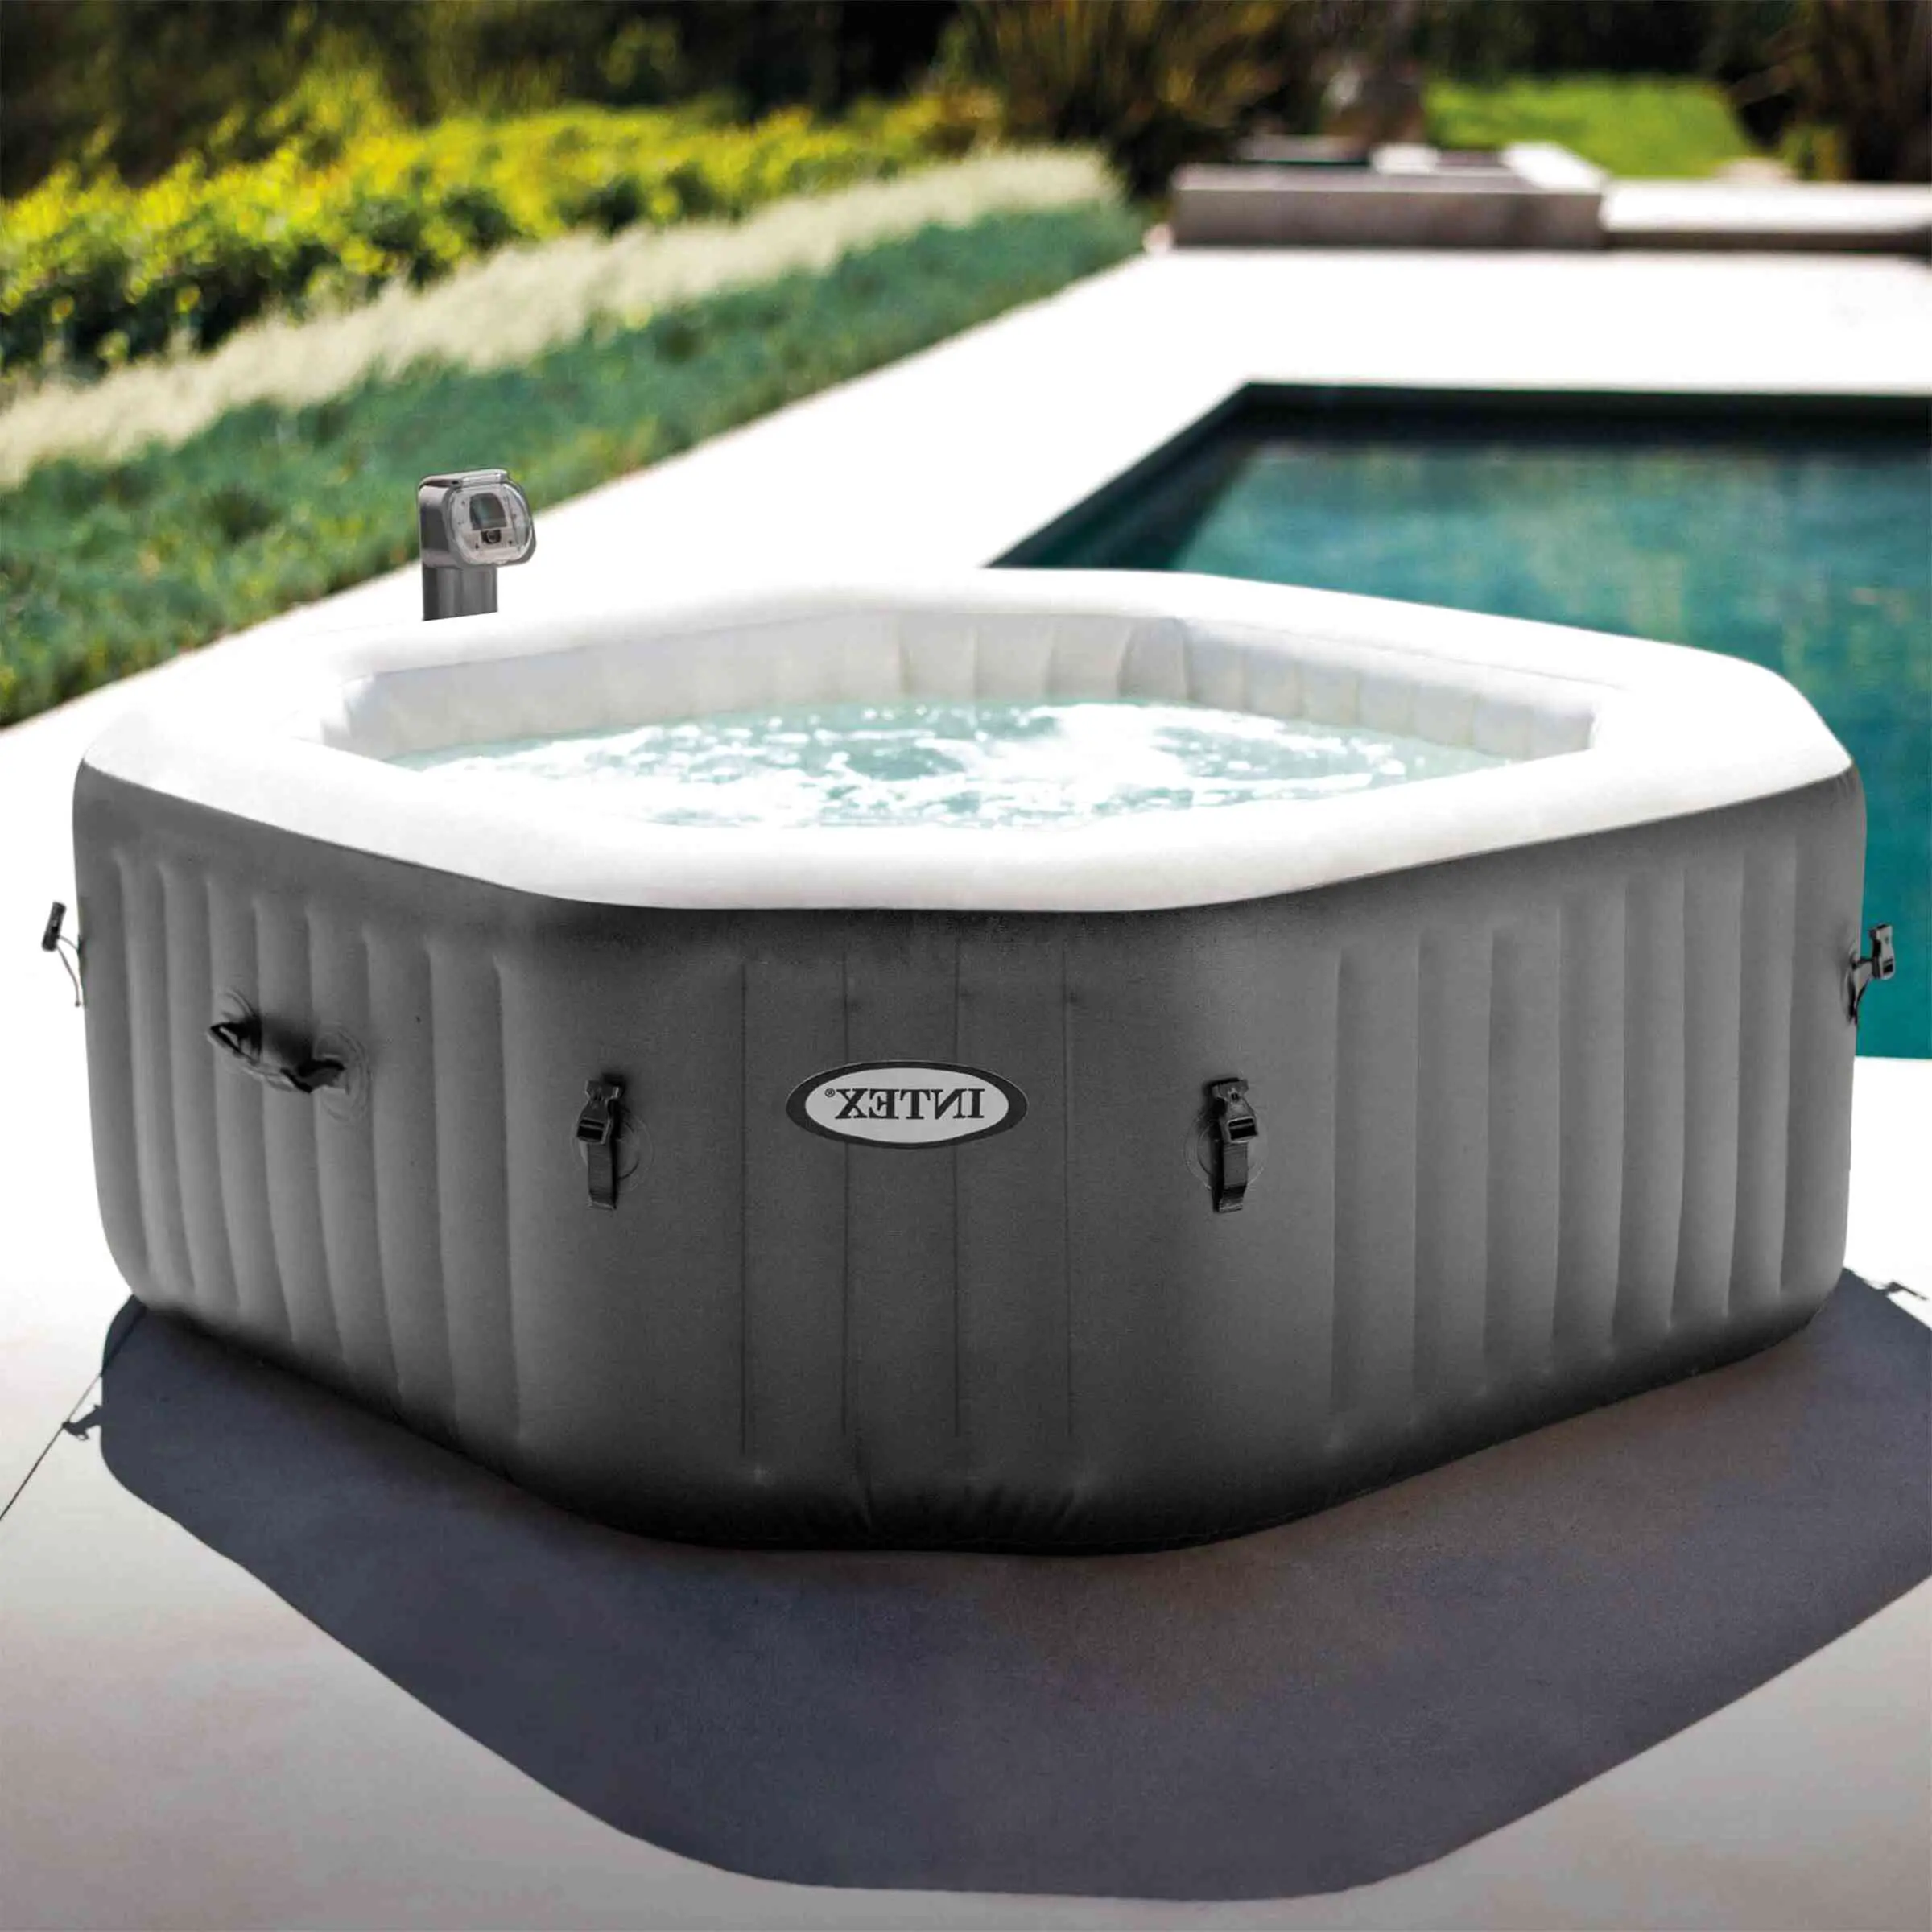 Portable Hot Tub for sale in UK